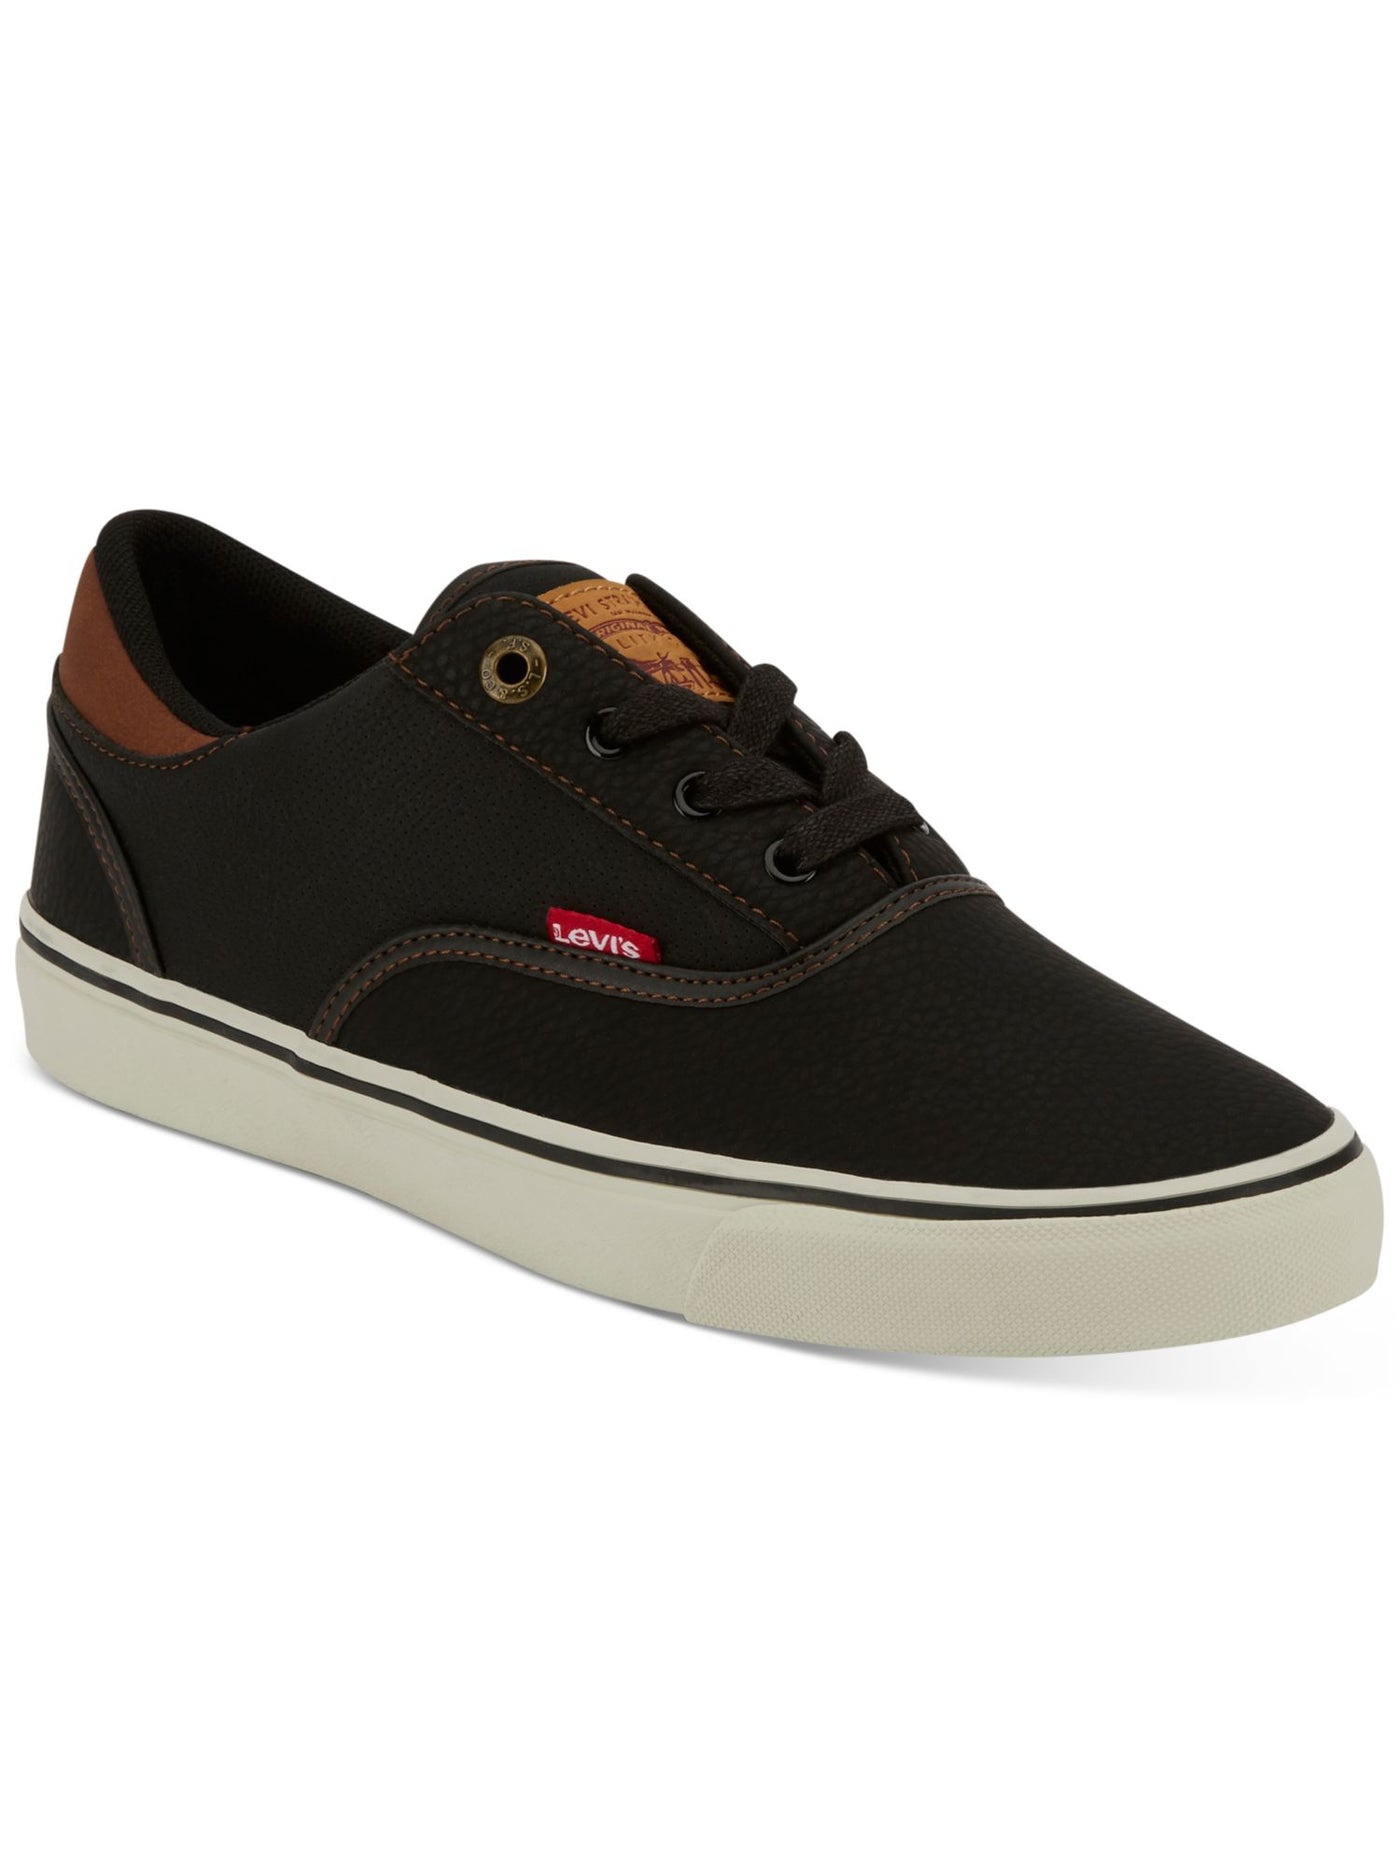 LEVI'S Mens Black Cushioned Comfort Ethan Round Toe Lace-Up Sneakers Shoes 9